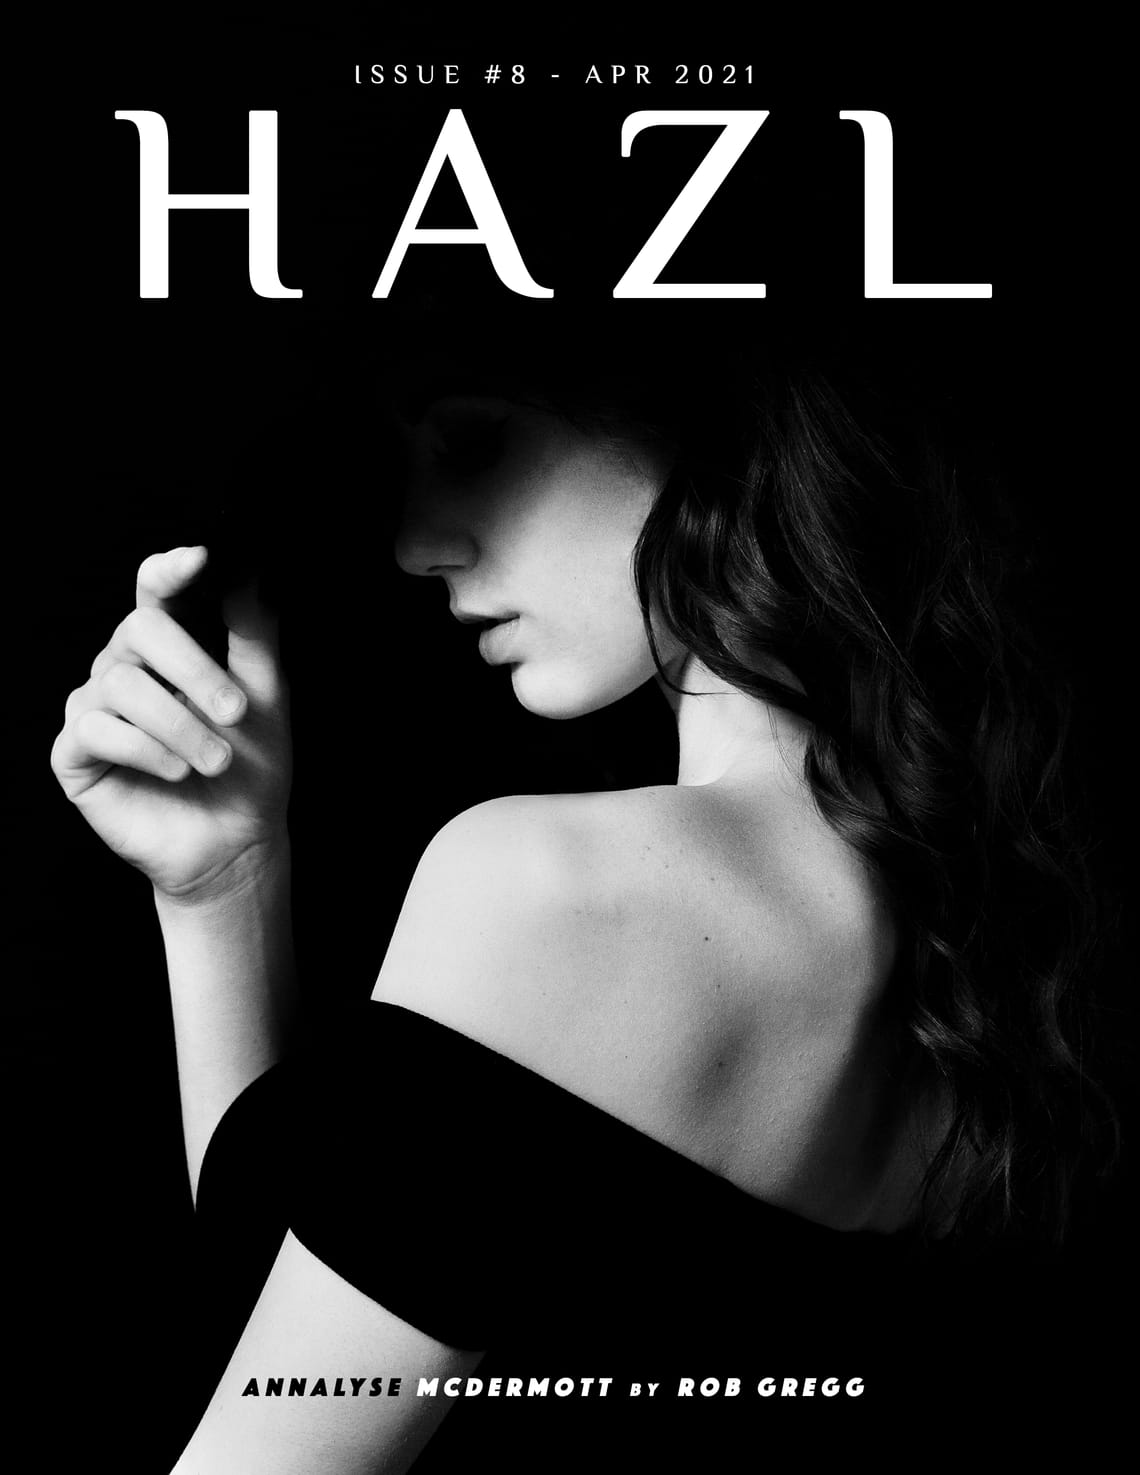 HAZL Magazine Issue #8 -  April 2021 Launched Worldwide